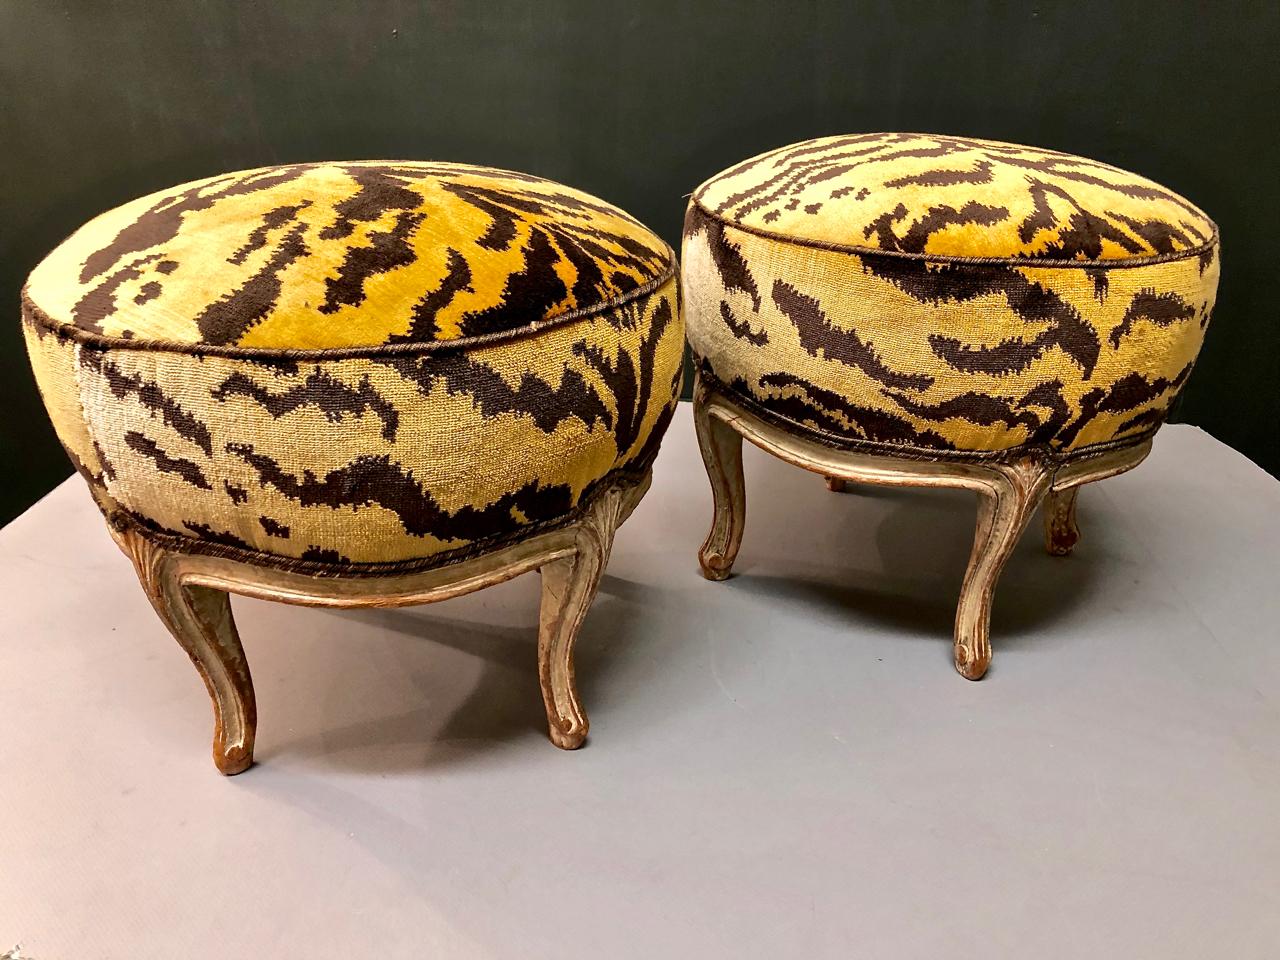 This is a charming pair of Louis XV-style footstools that are just slightly out-of-period and date to the late 18th century. The stools retain their original painted surfaces and are in overall very good structural condition. They are newly